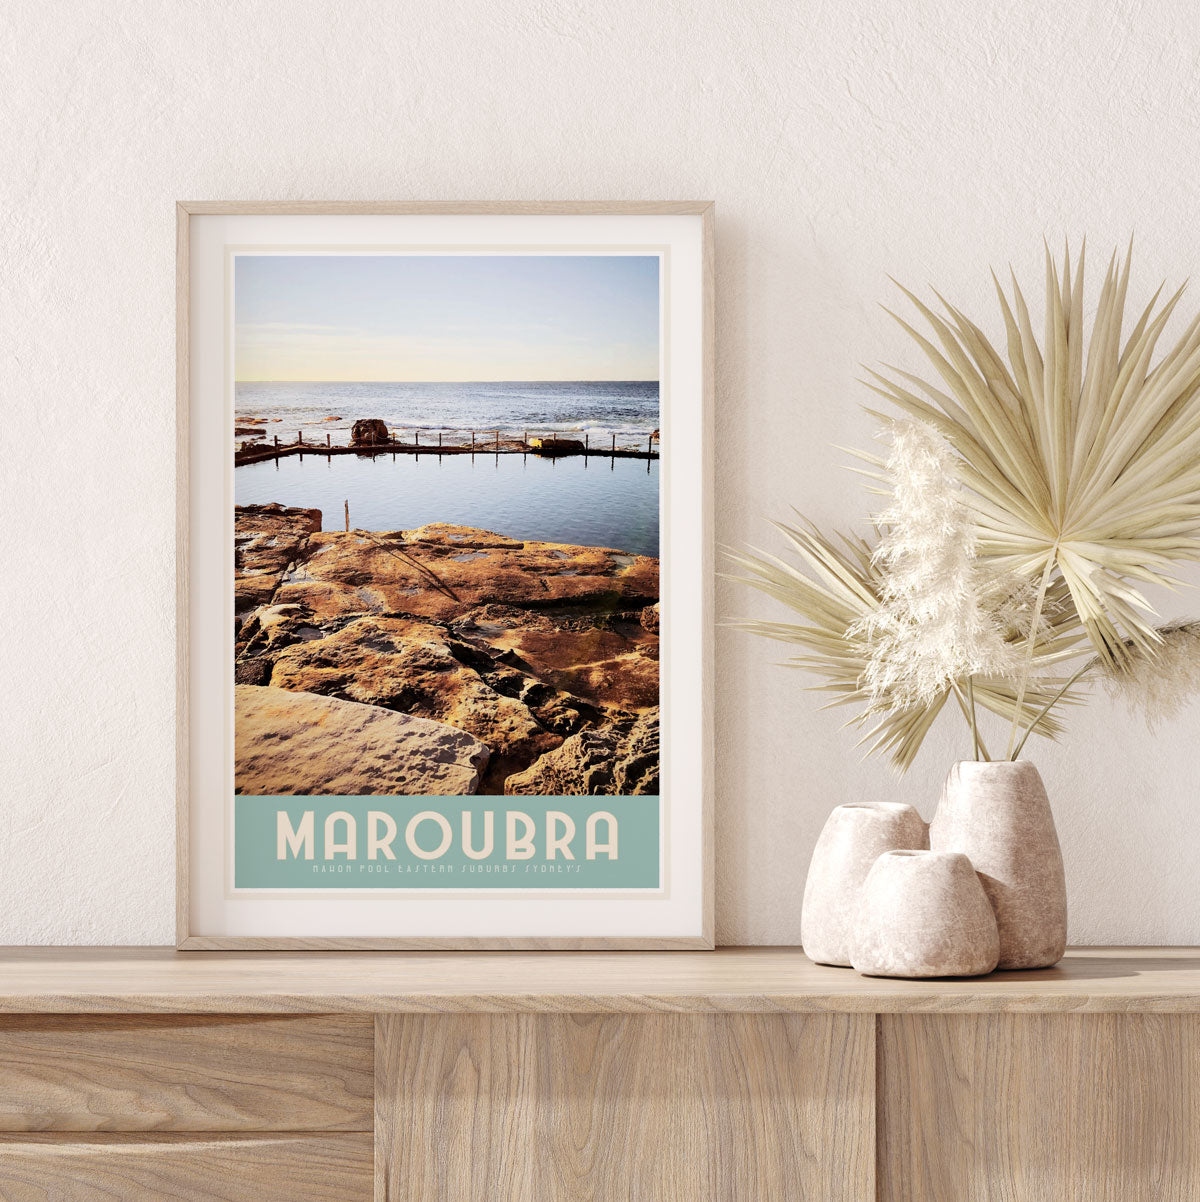 Mahon Pool maroubra framed travel print by Places we Luv